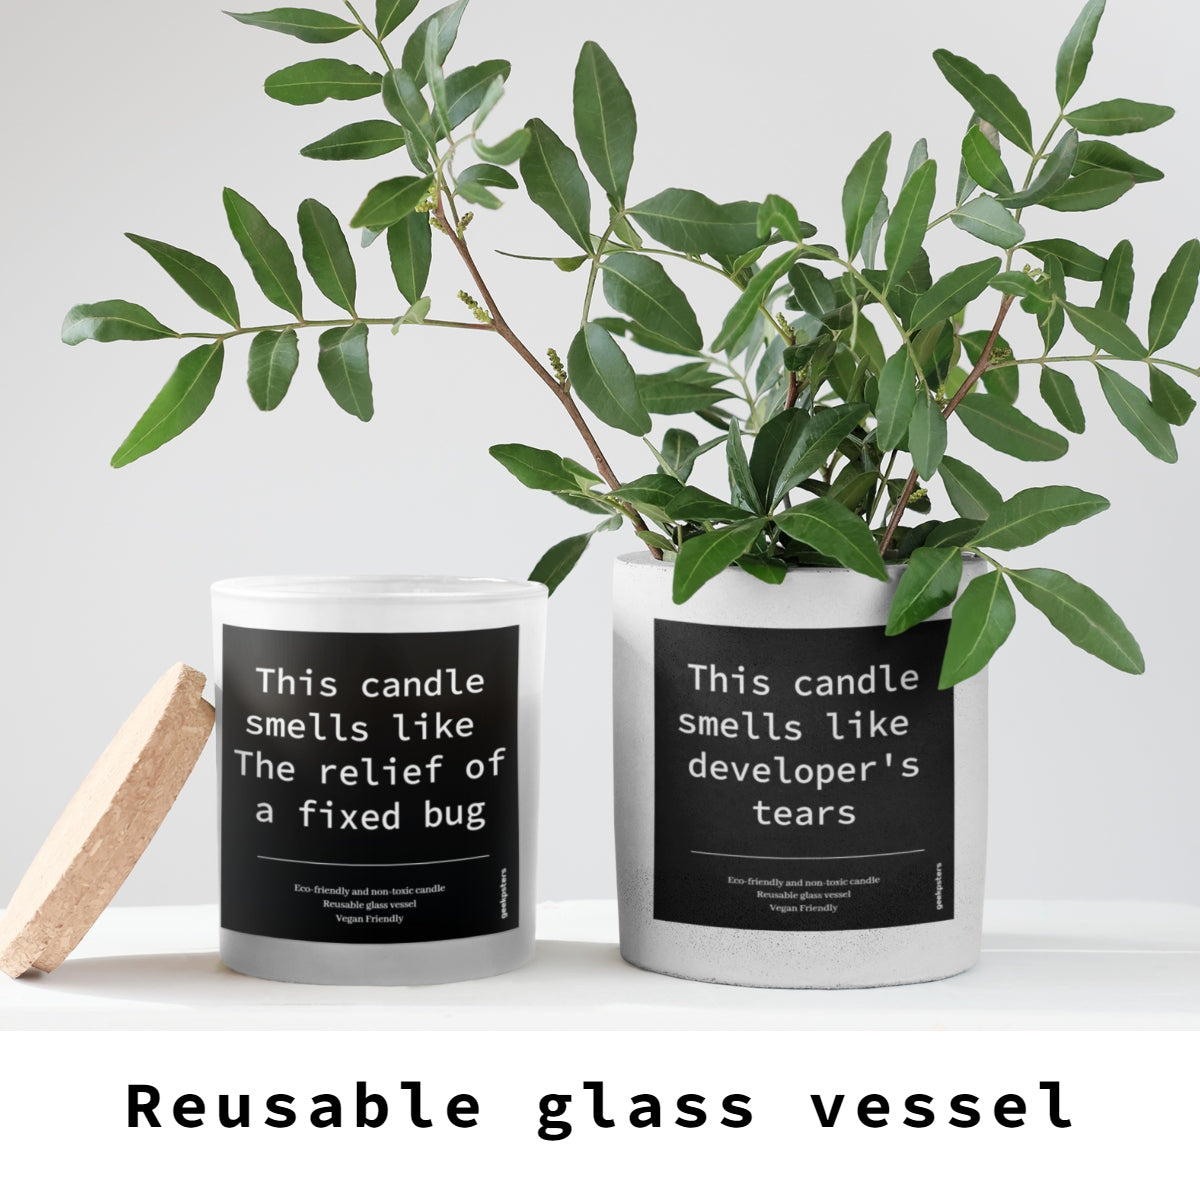 Two "This candle smells like a developer's keyboard after a long coding session" candles in reusable glass vessels with humorous labels, one about fixing a bug and the other about a developer's tears, accompanied by a branch with green leaves.